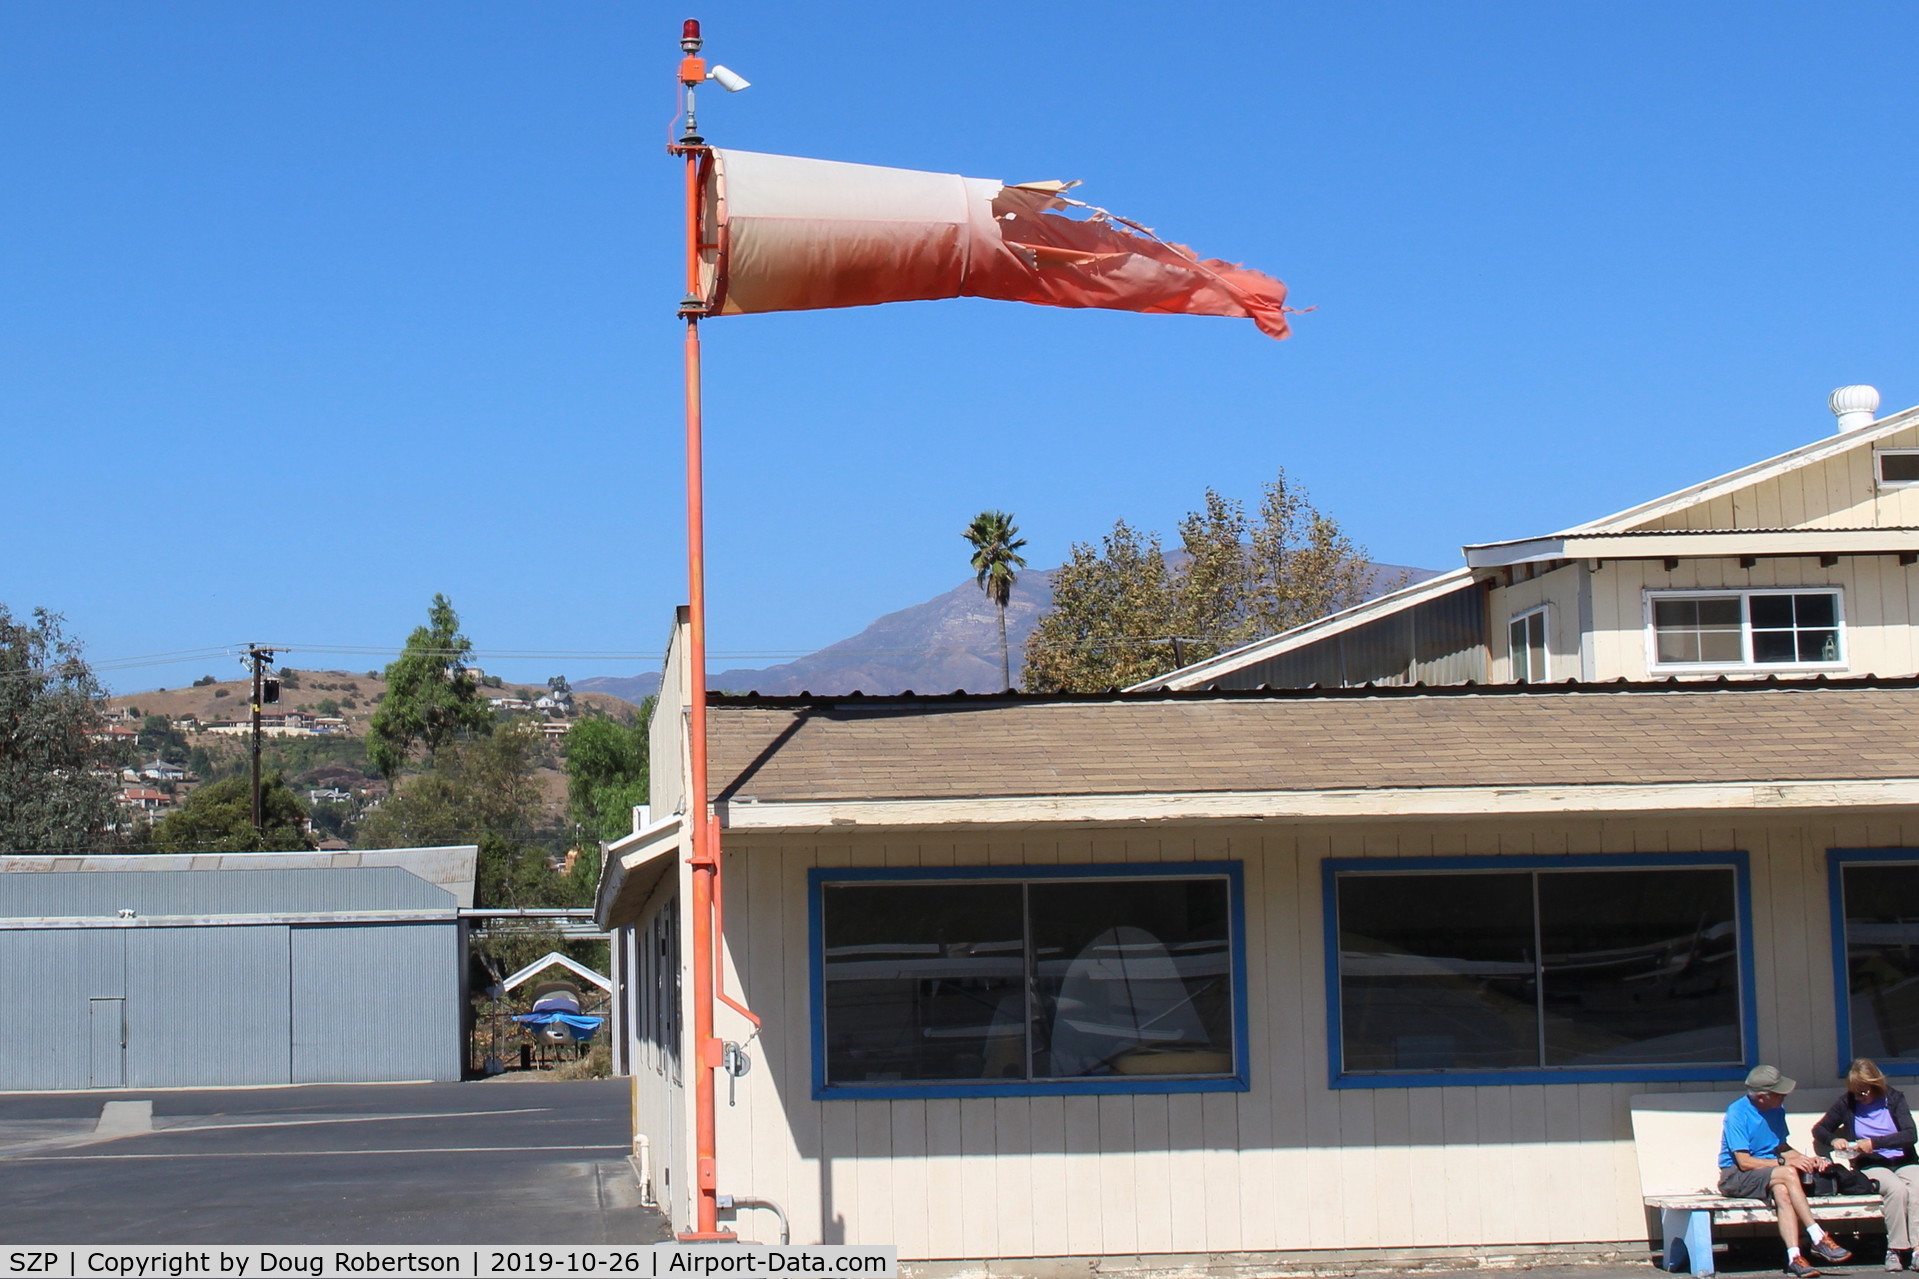 Santa Paula Airport (SZP) - Newest windsock a bit tattered from both santanas and on-shore strong winds